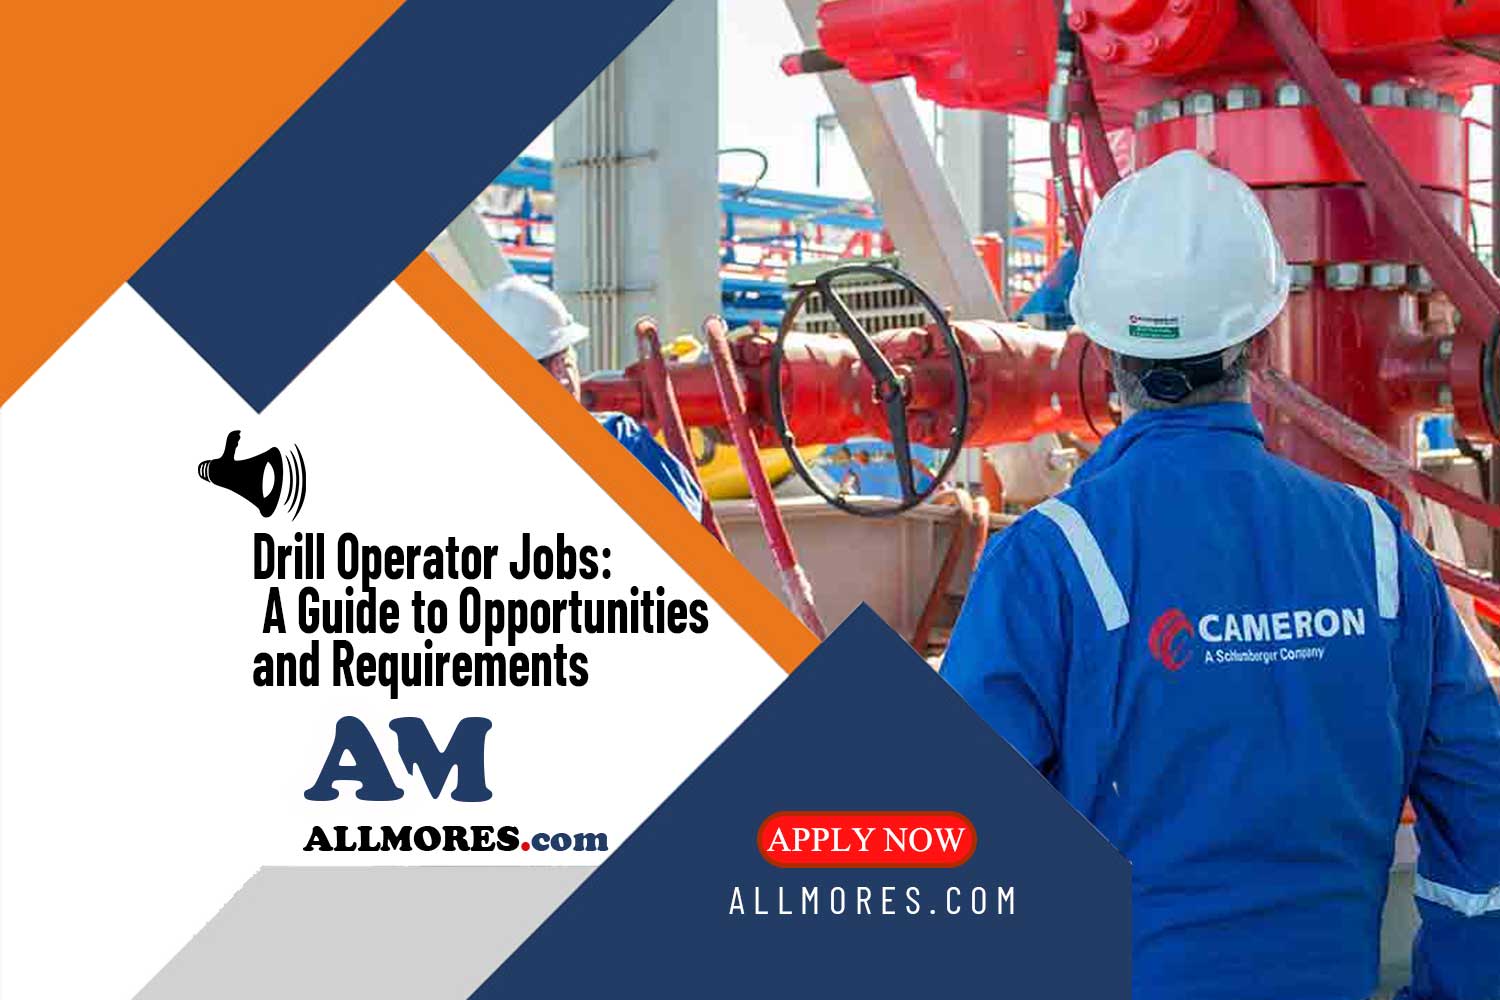 Drill Operator Jobs – ALL MORES